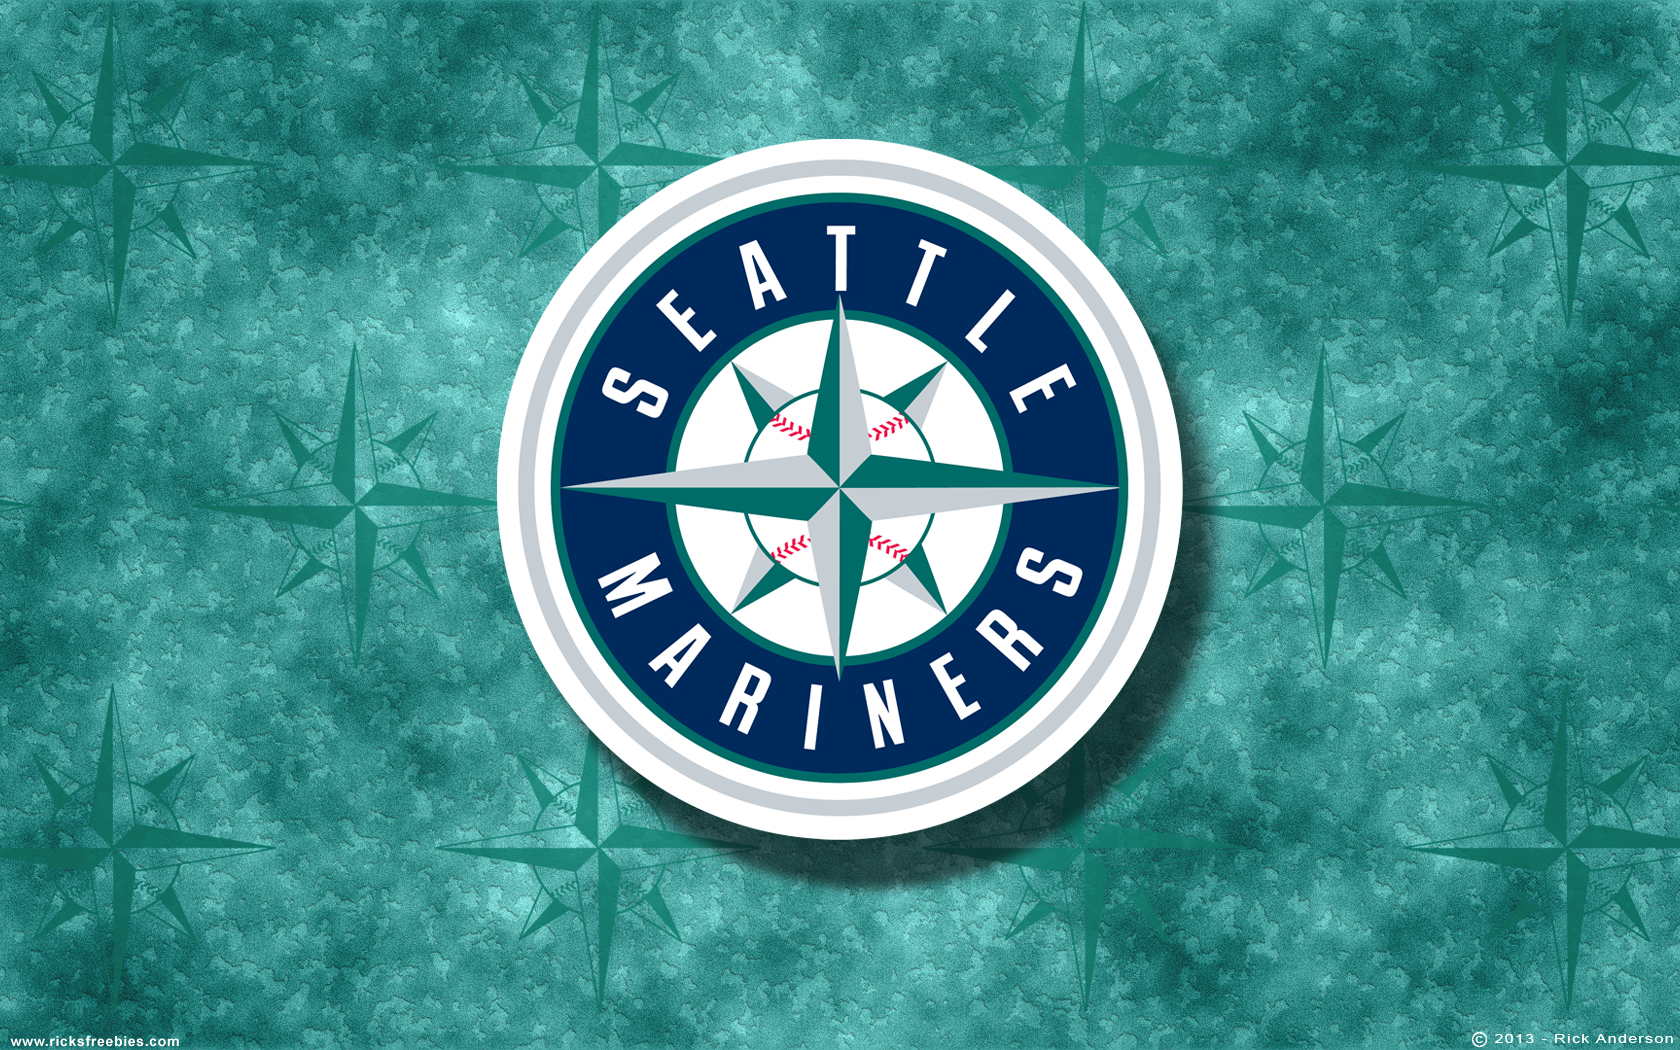 Seattle Mariners HD Wallpaper 64 images